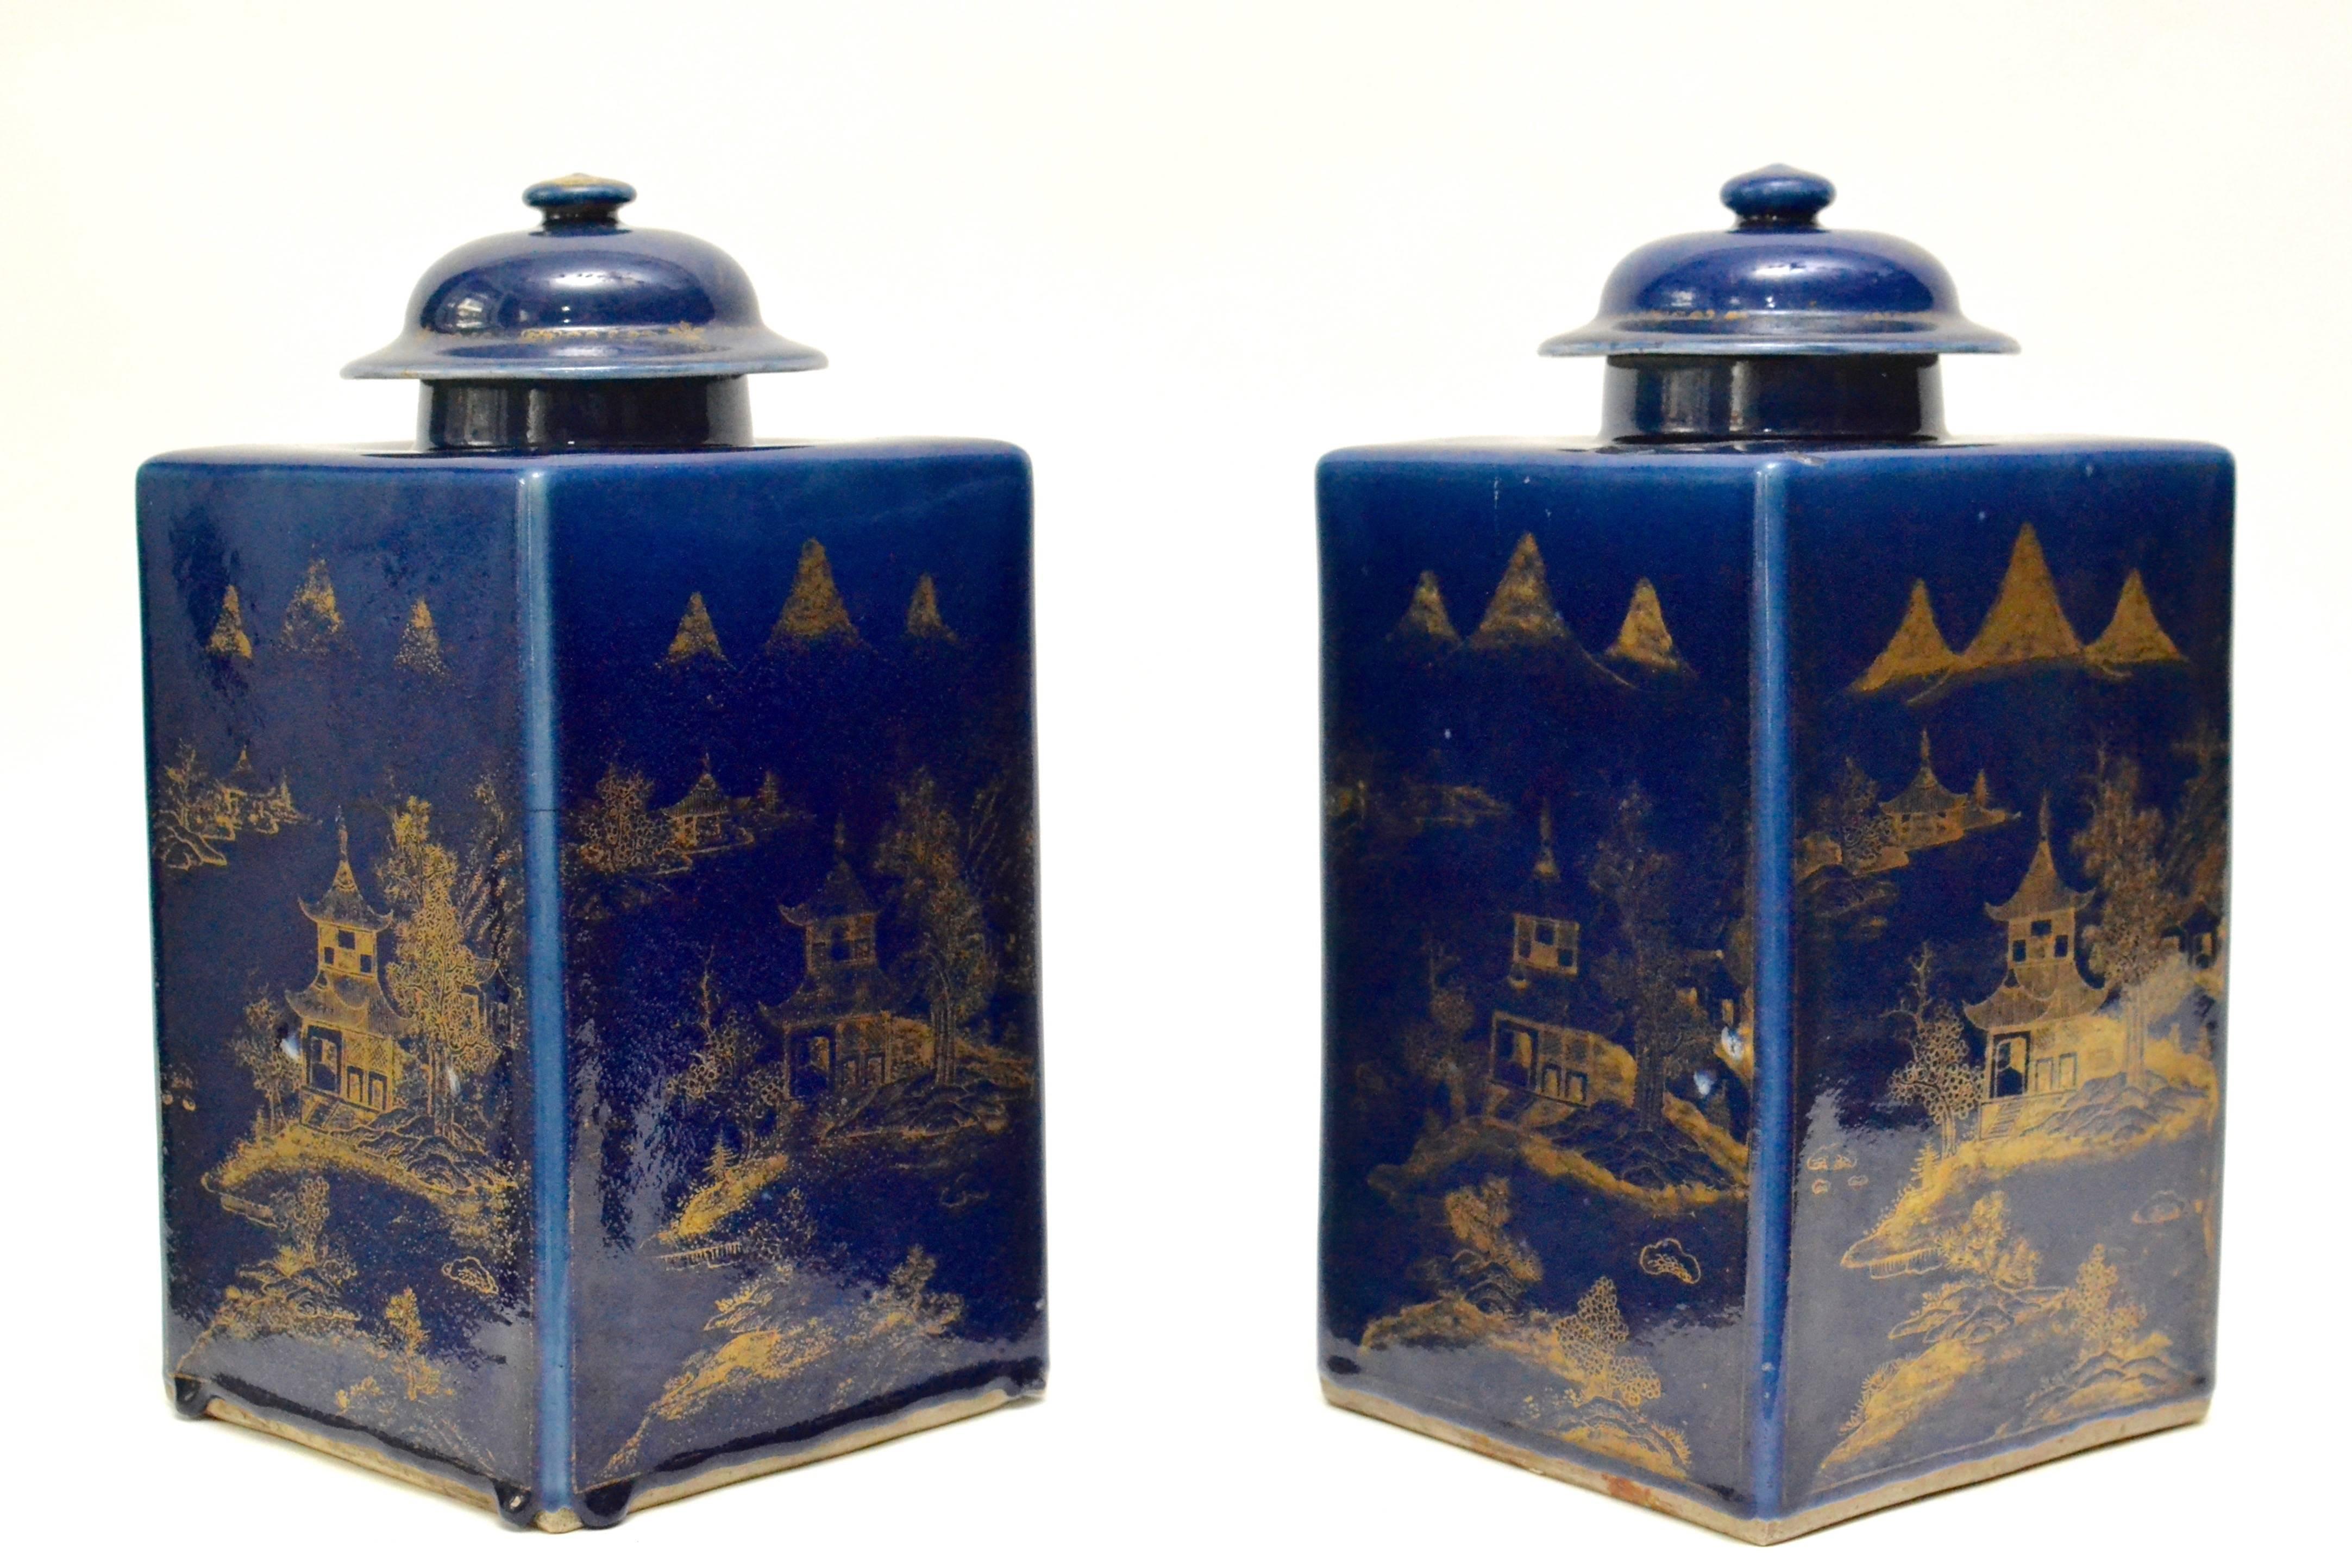 A rare pair of late 18th century or early 19th century Chinese powder blue tea caddy urns with lids.